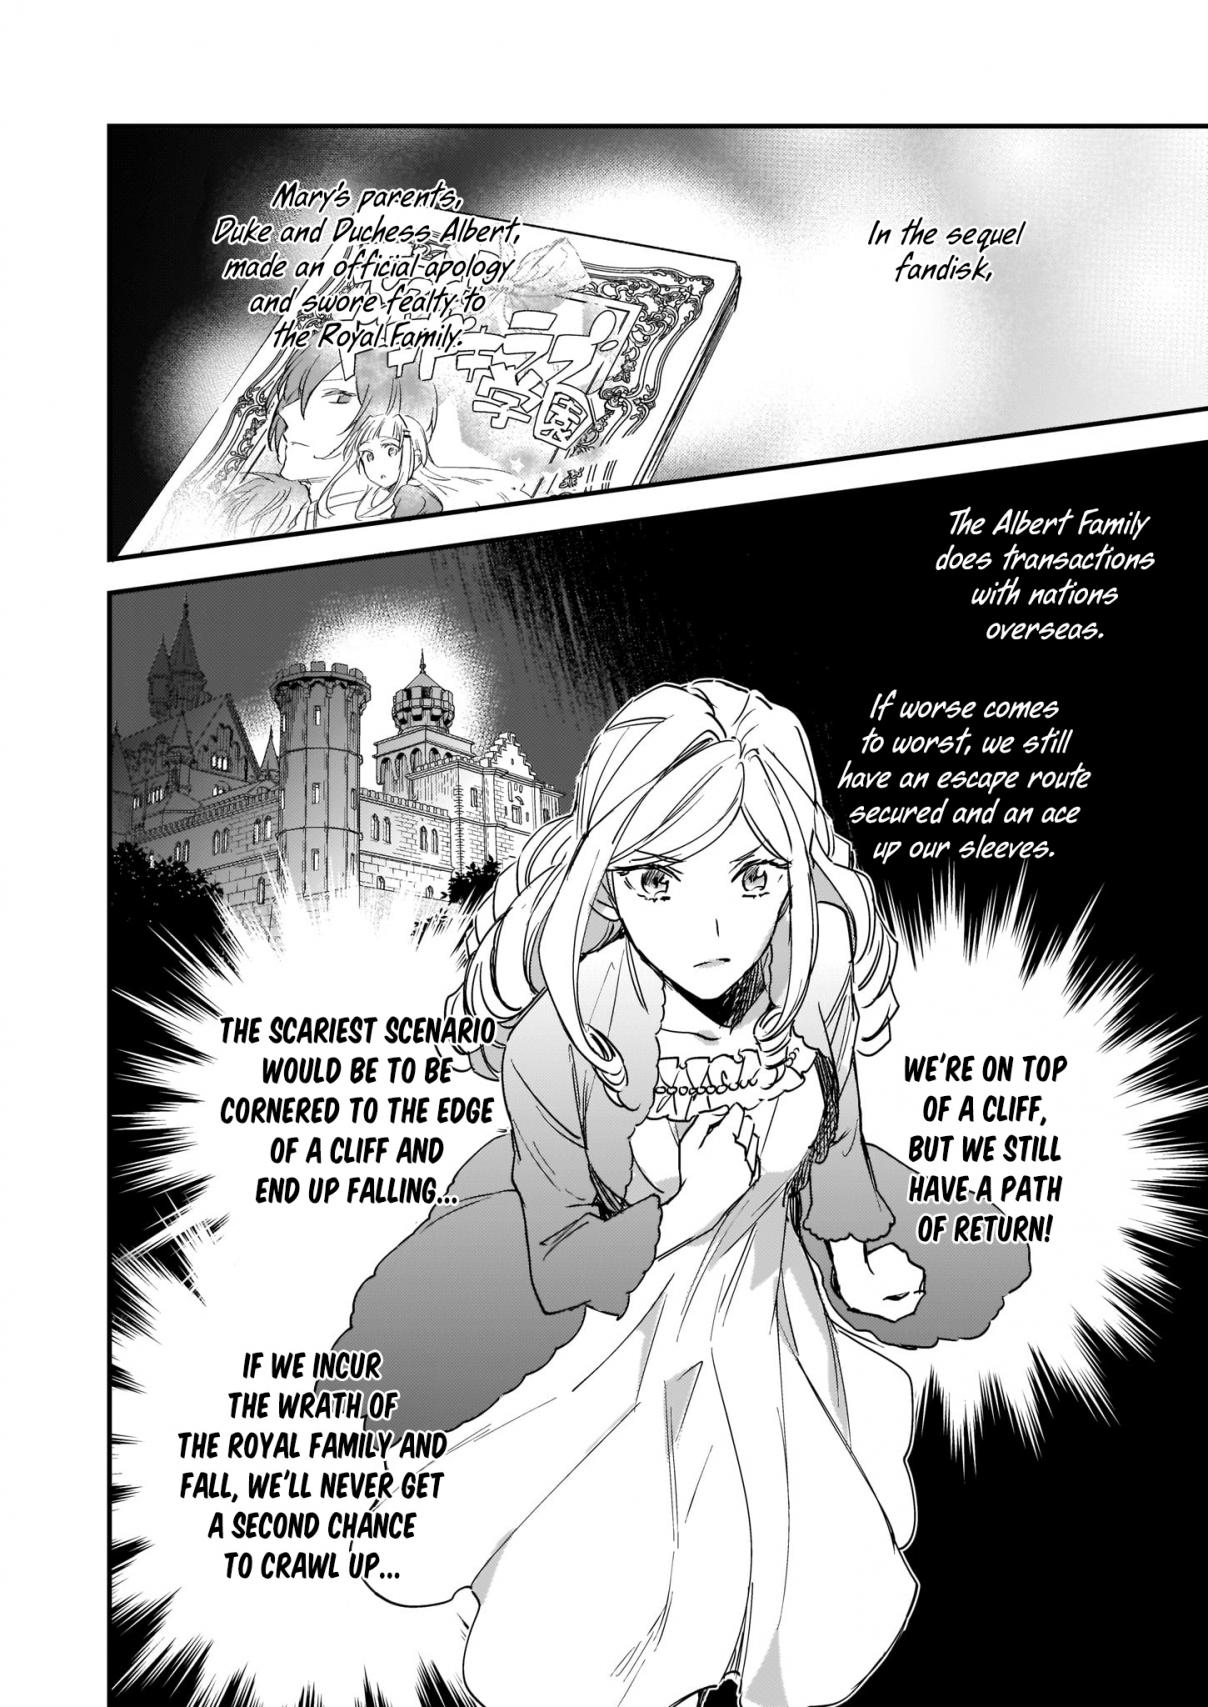 The Daughter of the Albert House Wishes for Ruin Vol. 2 Ch. 7